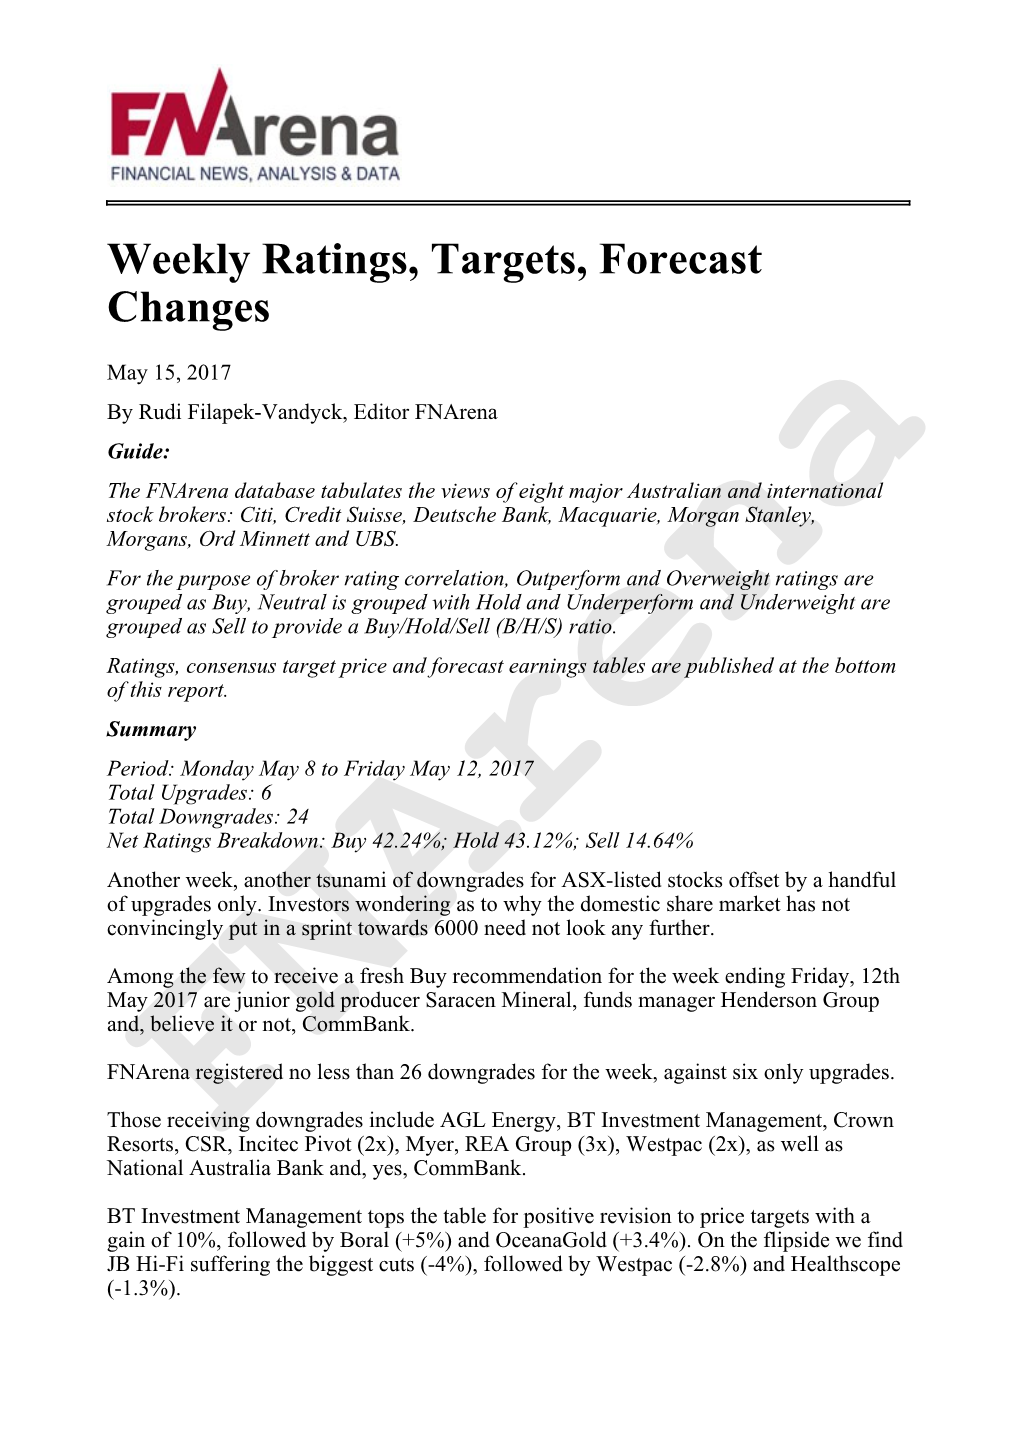 Weekly Ratings, Targets, Forecast Changes